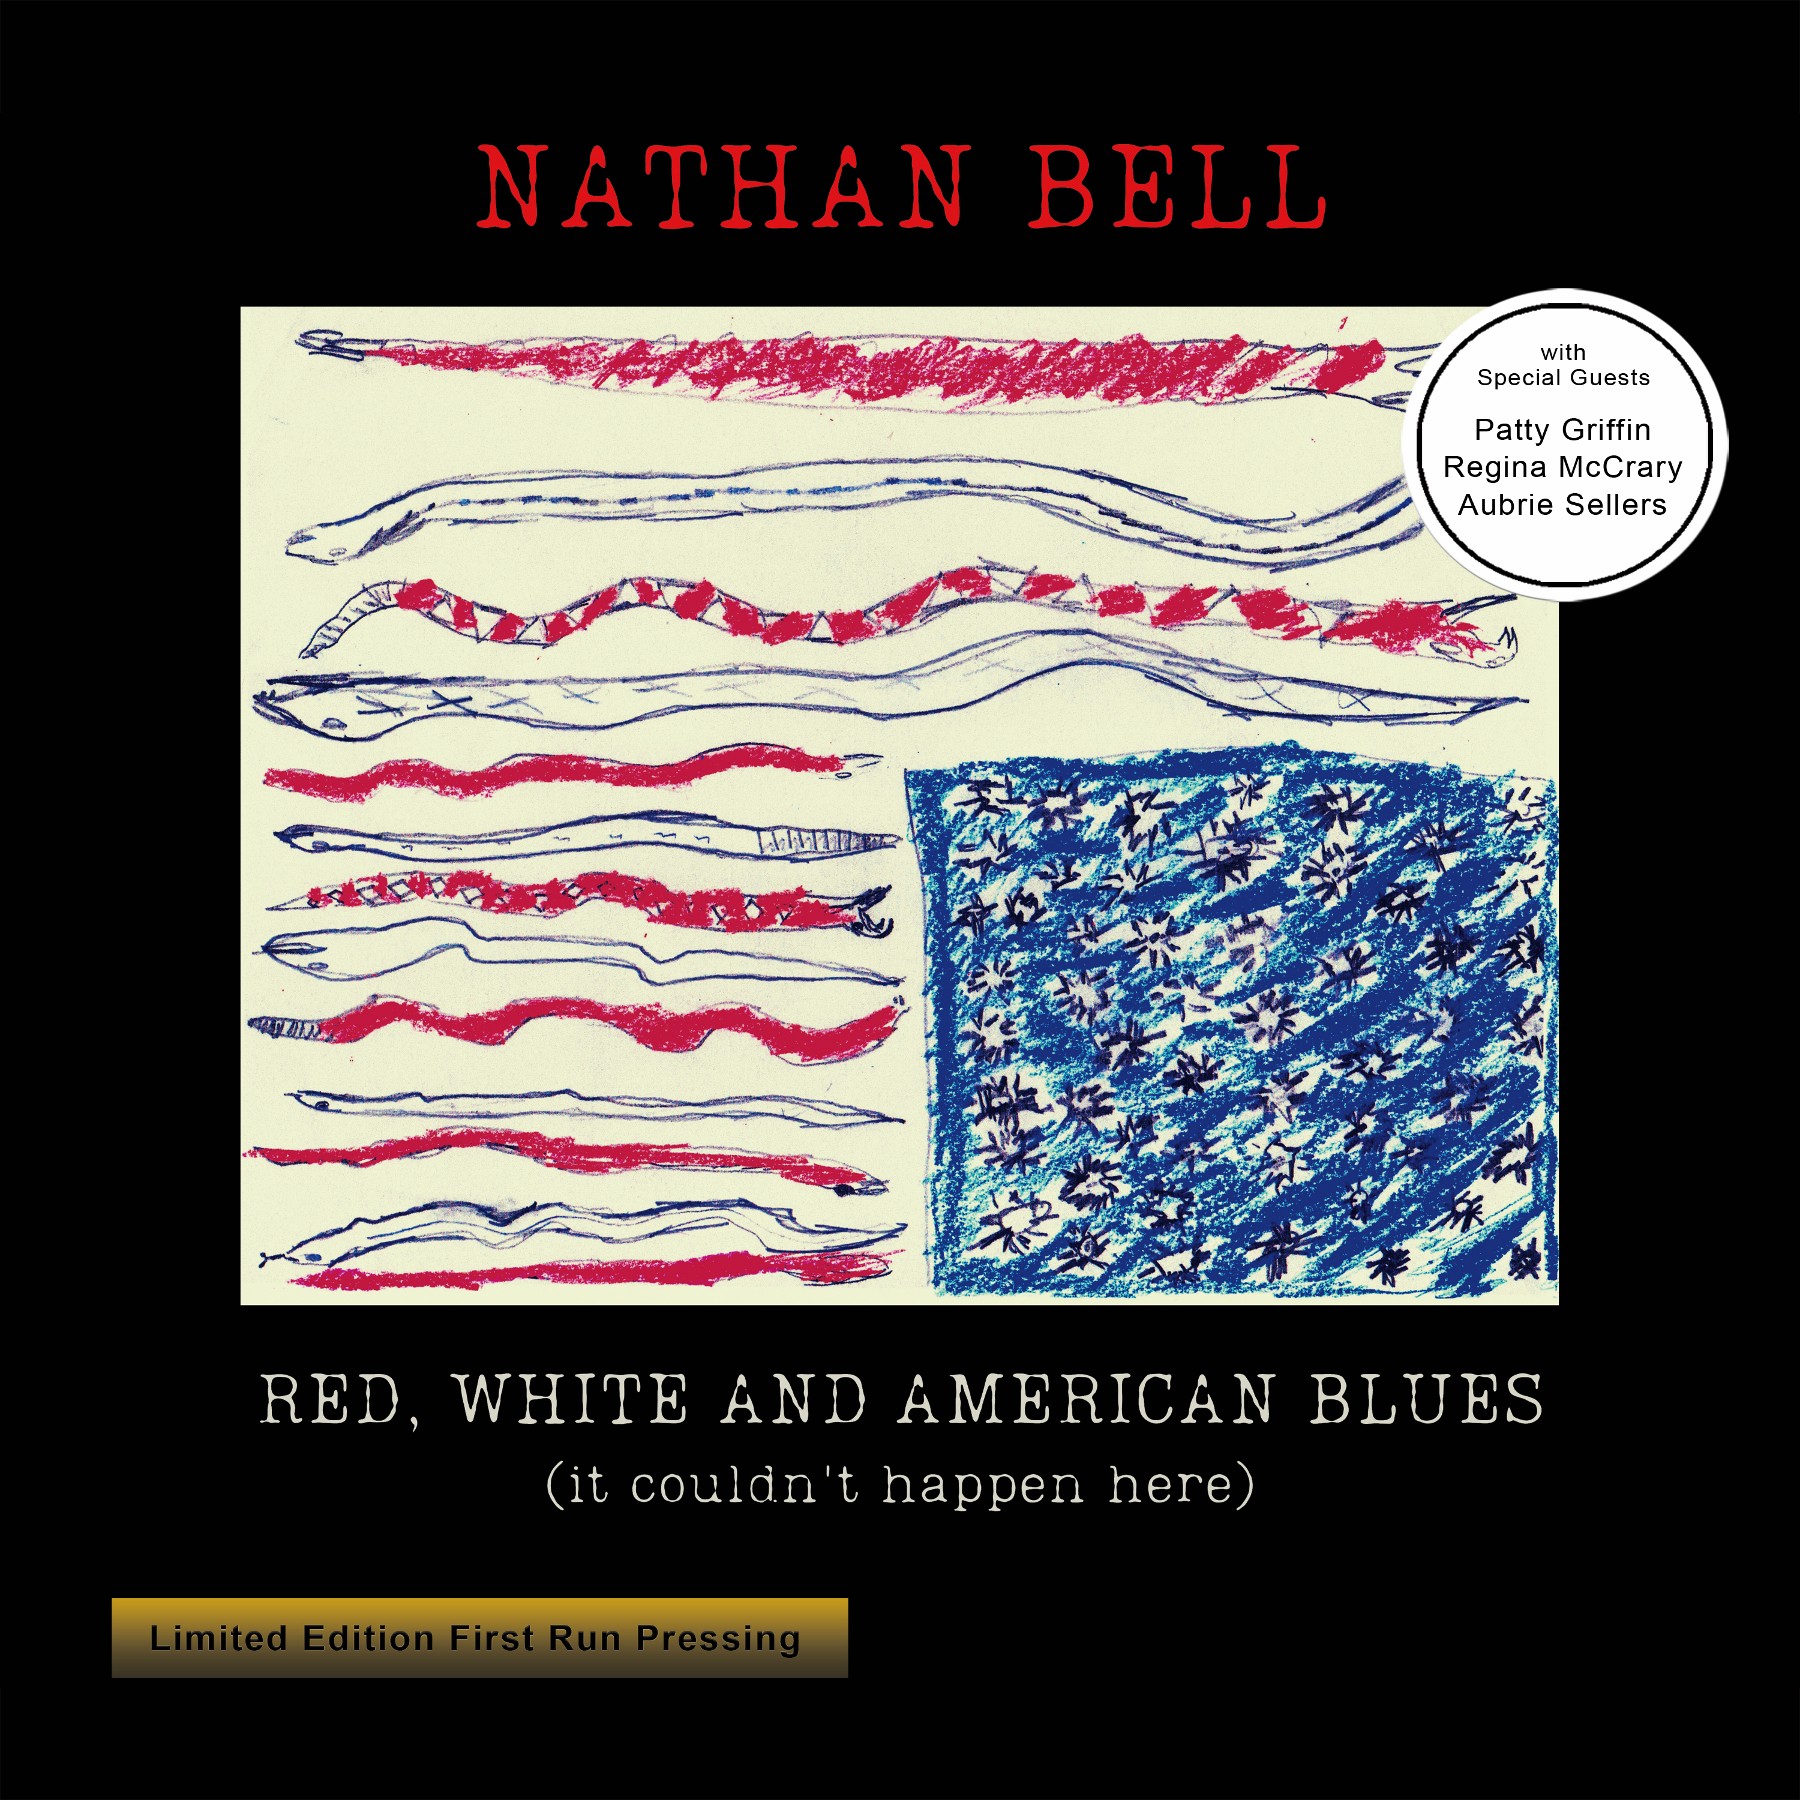 Nathan Bell - 'Red, White and American Blues (it couldn't happen here)' - cover (300dpi)